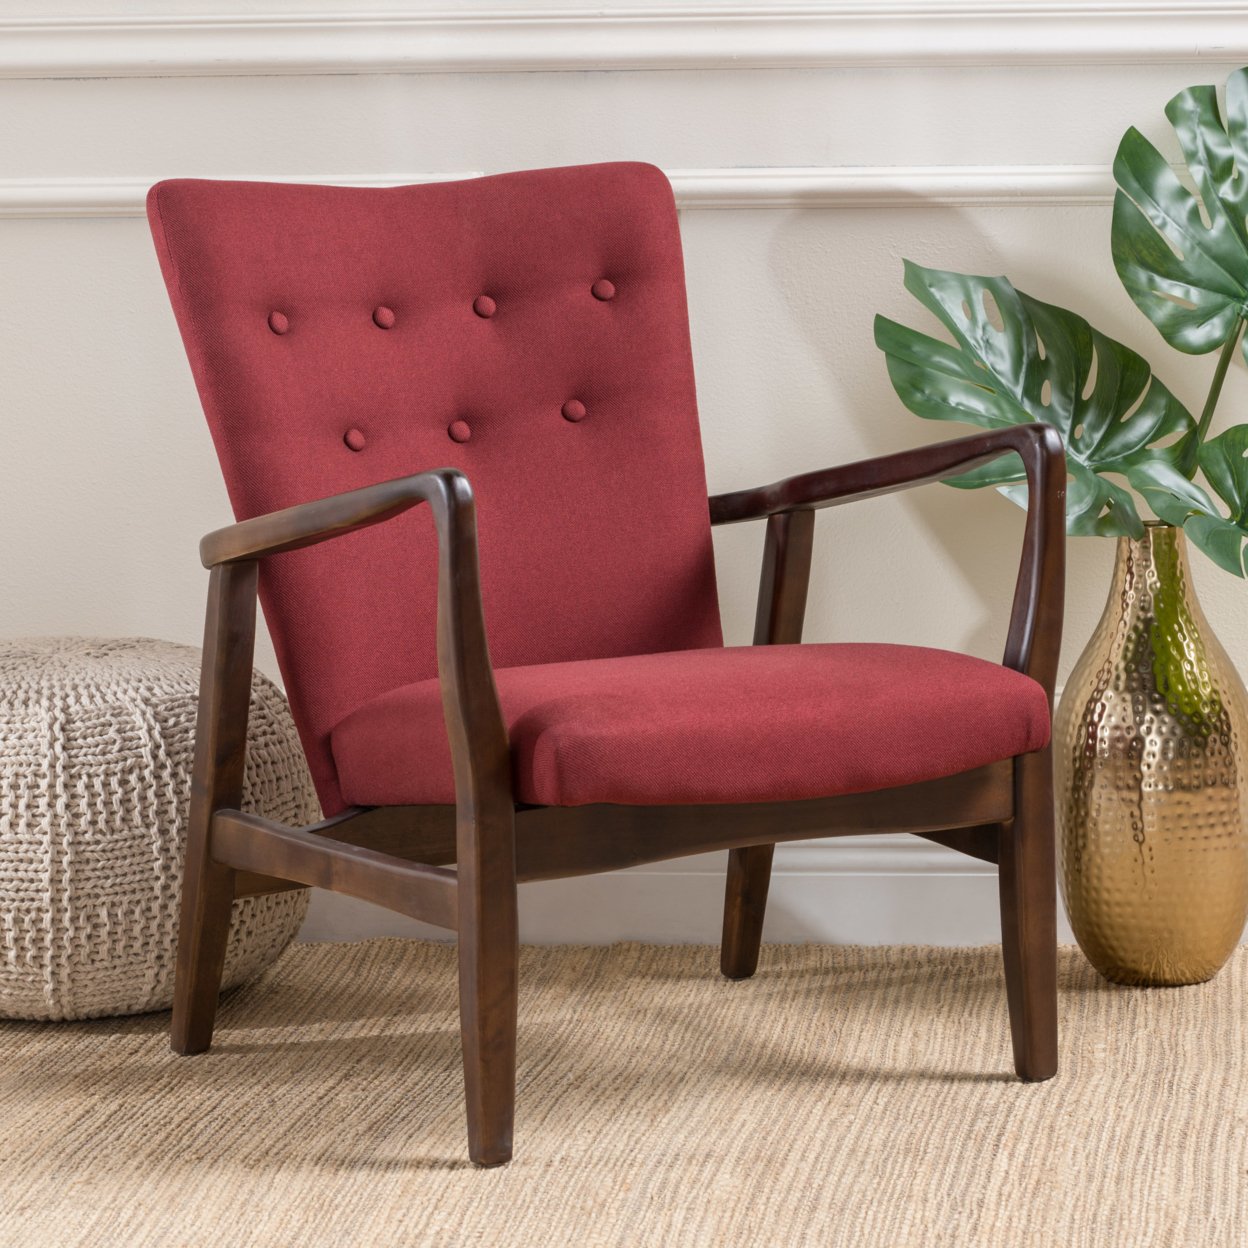 Suffolk French-Style Fabric Arm Chair - Deep Red, Single